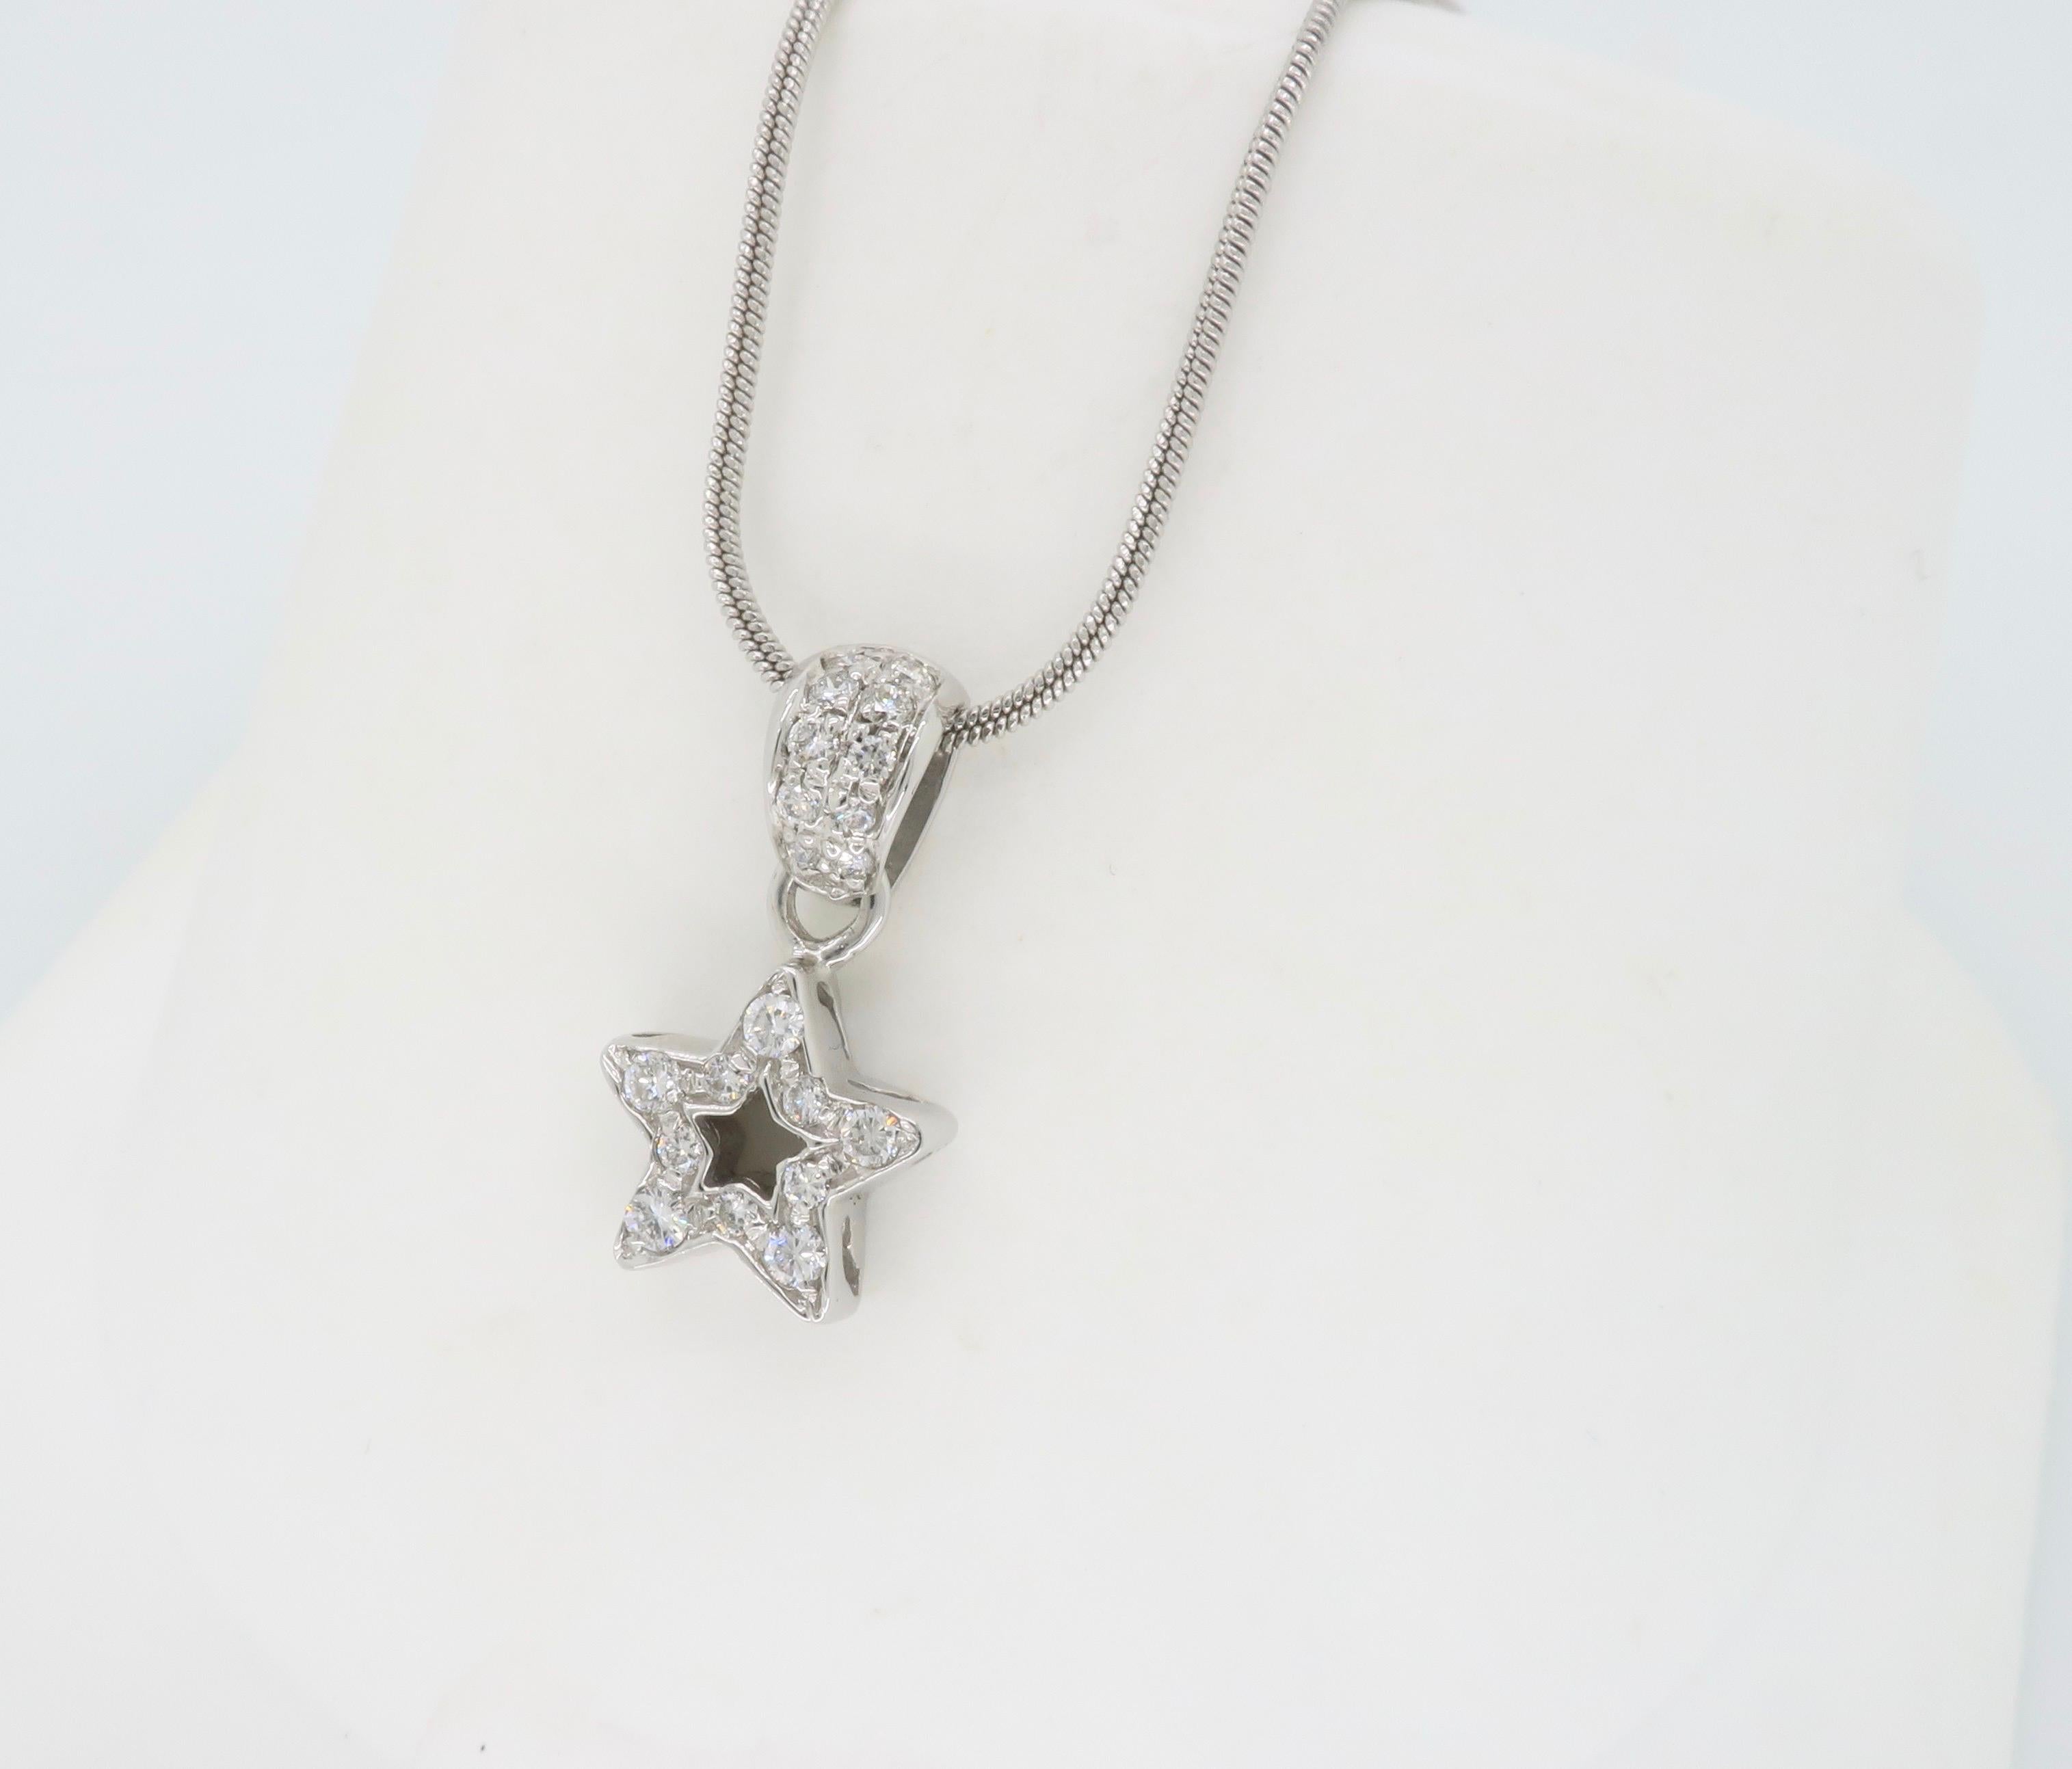 High quality 18k white gold diamond star pendant necklace 
Diamond Carat Weight: Approximately .35CTW
Diamond Cut: Round Brilliant Diamonds
Color: Average G-H
Clarity: VS
Metal: 18K White Gold
Chain Length: 18” 
Marked/Tested: Stamped  “18K Italy